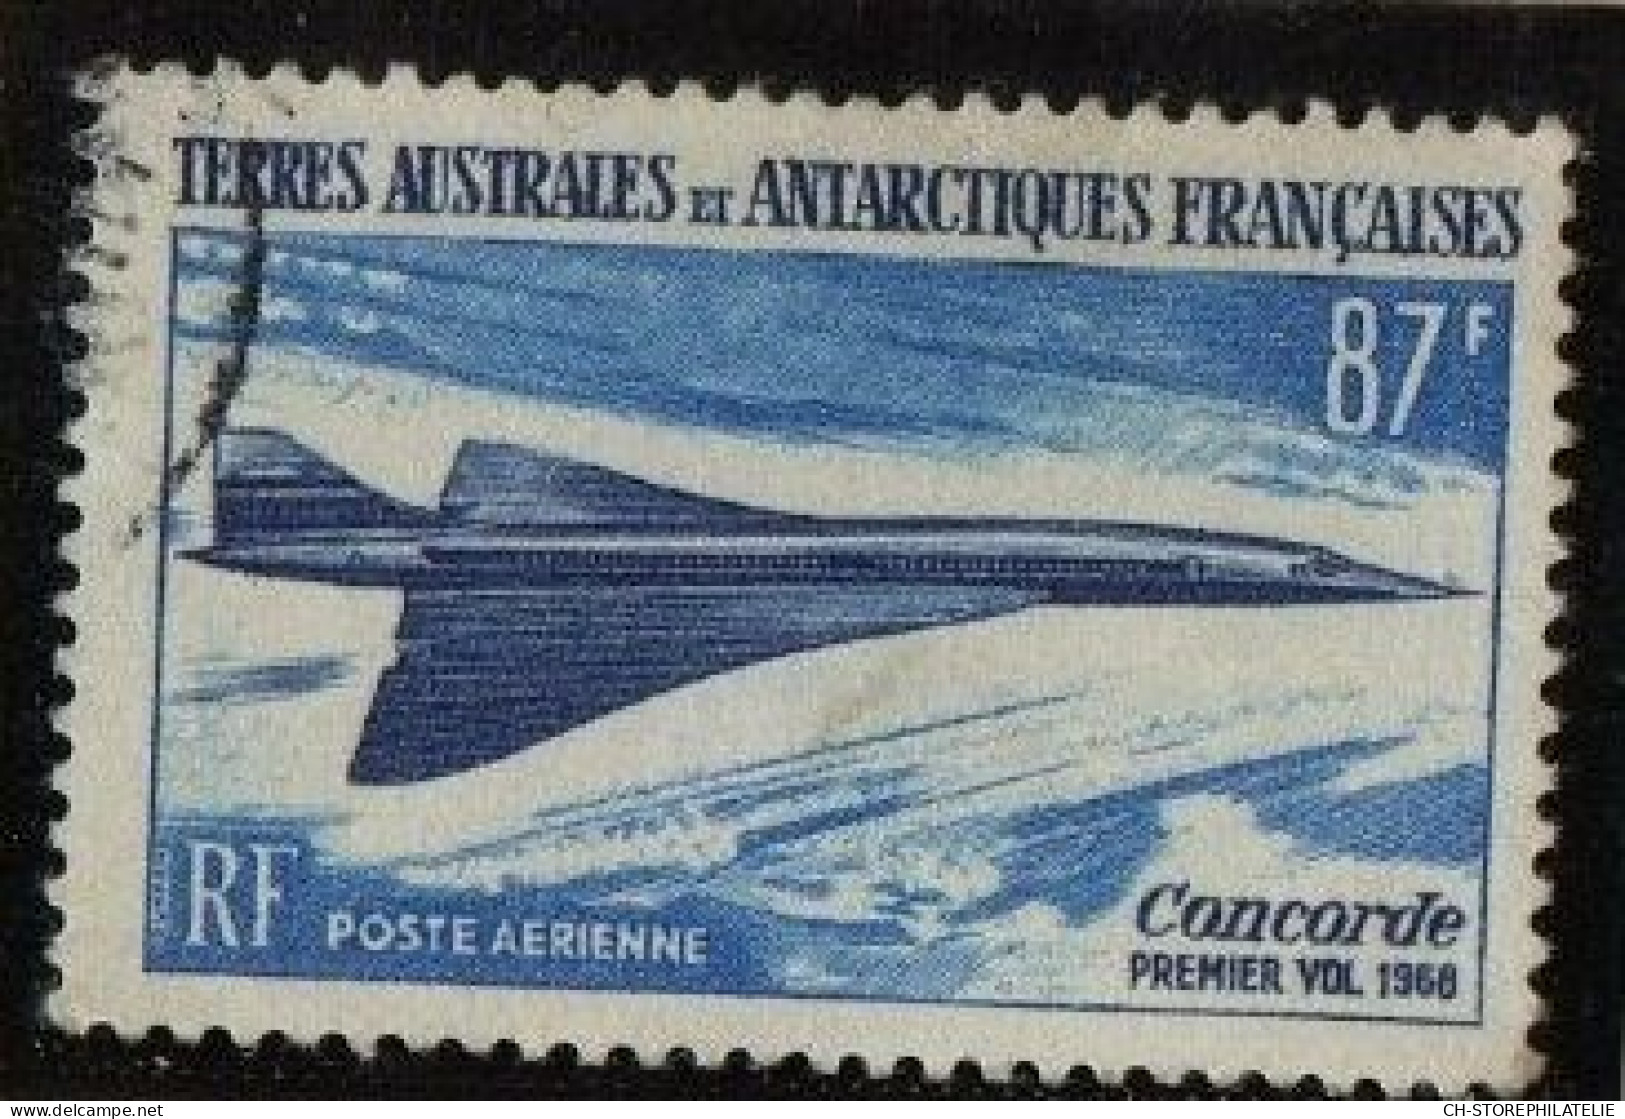 French Antarctica Airmail Nr. 19 Concorde Used Signed Val 87F RR - Oblitérés